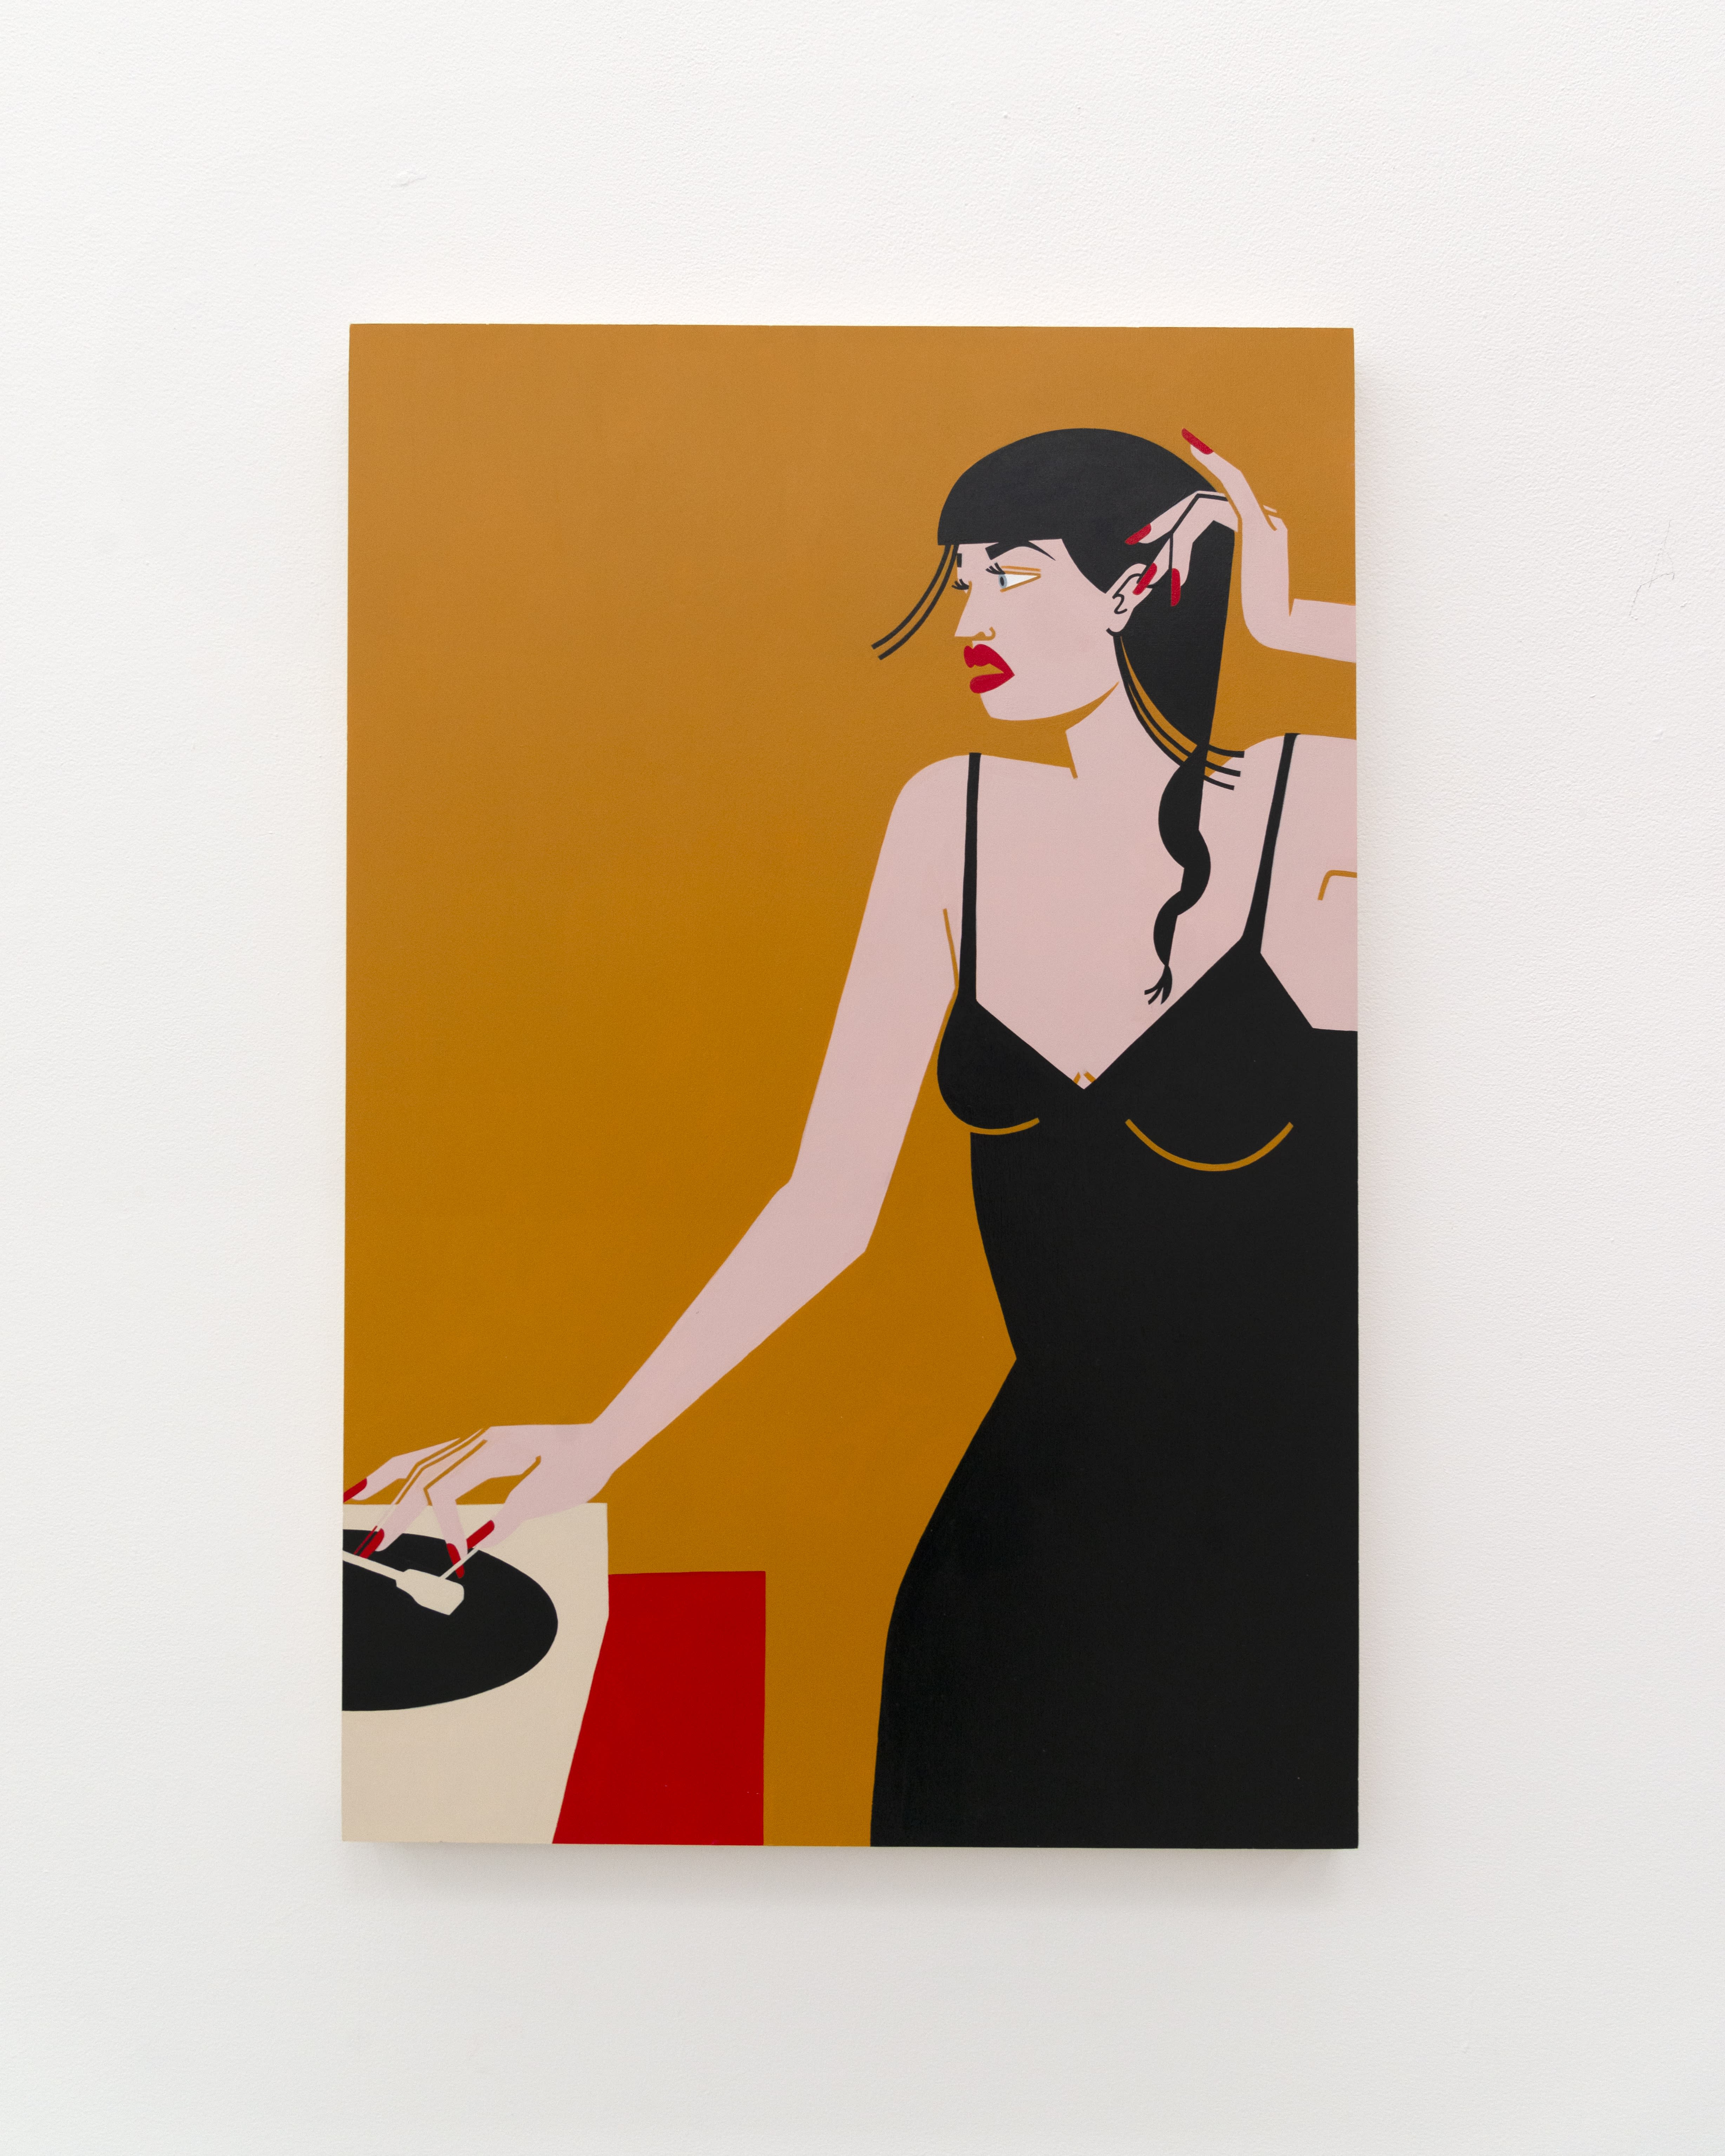 Painting by Jillian Evelyn featuring a woman in front of a record player.